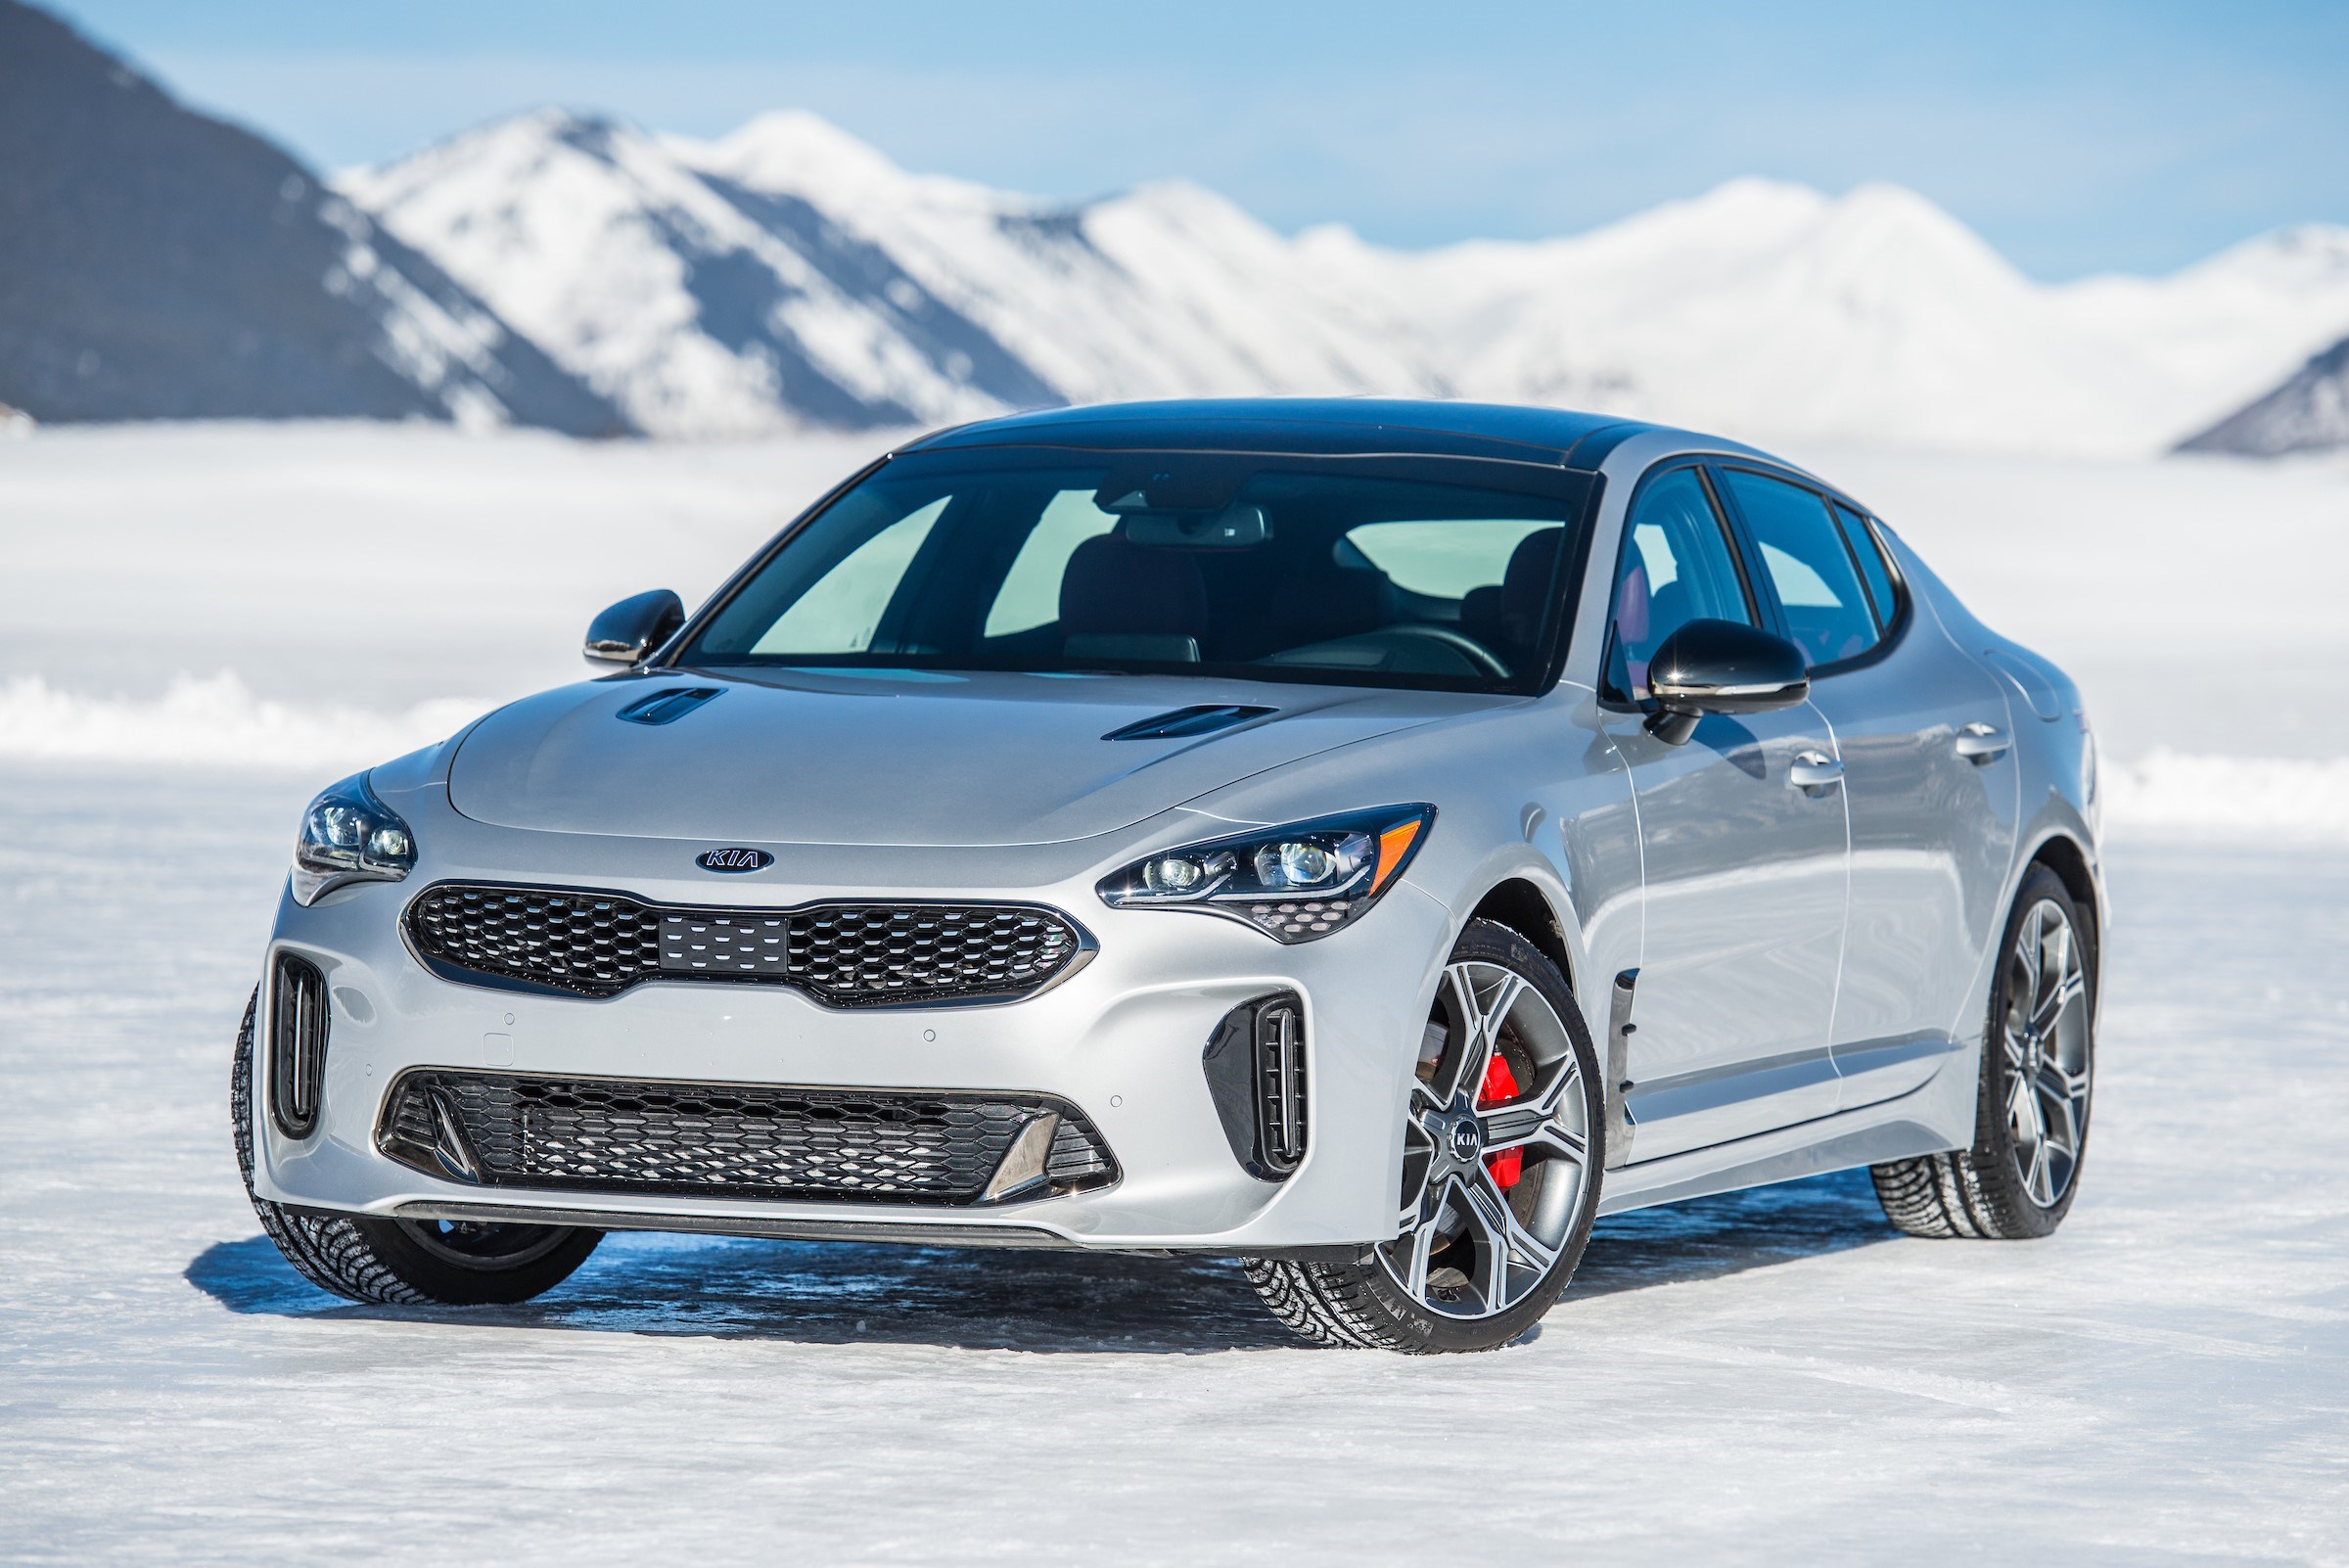 Hot or Not 2018 Kia Stinger GT2 Aims for the European Elite, But Does